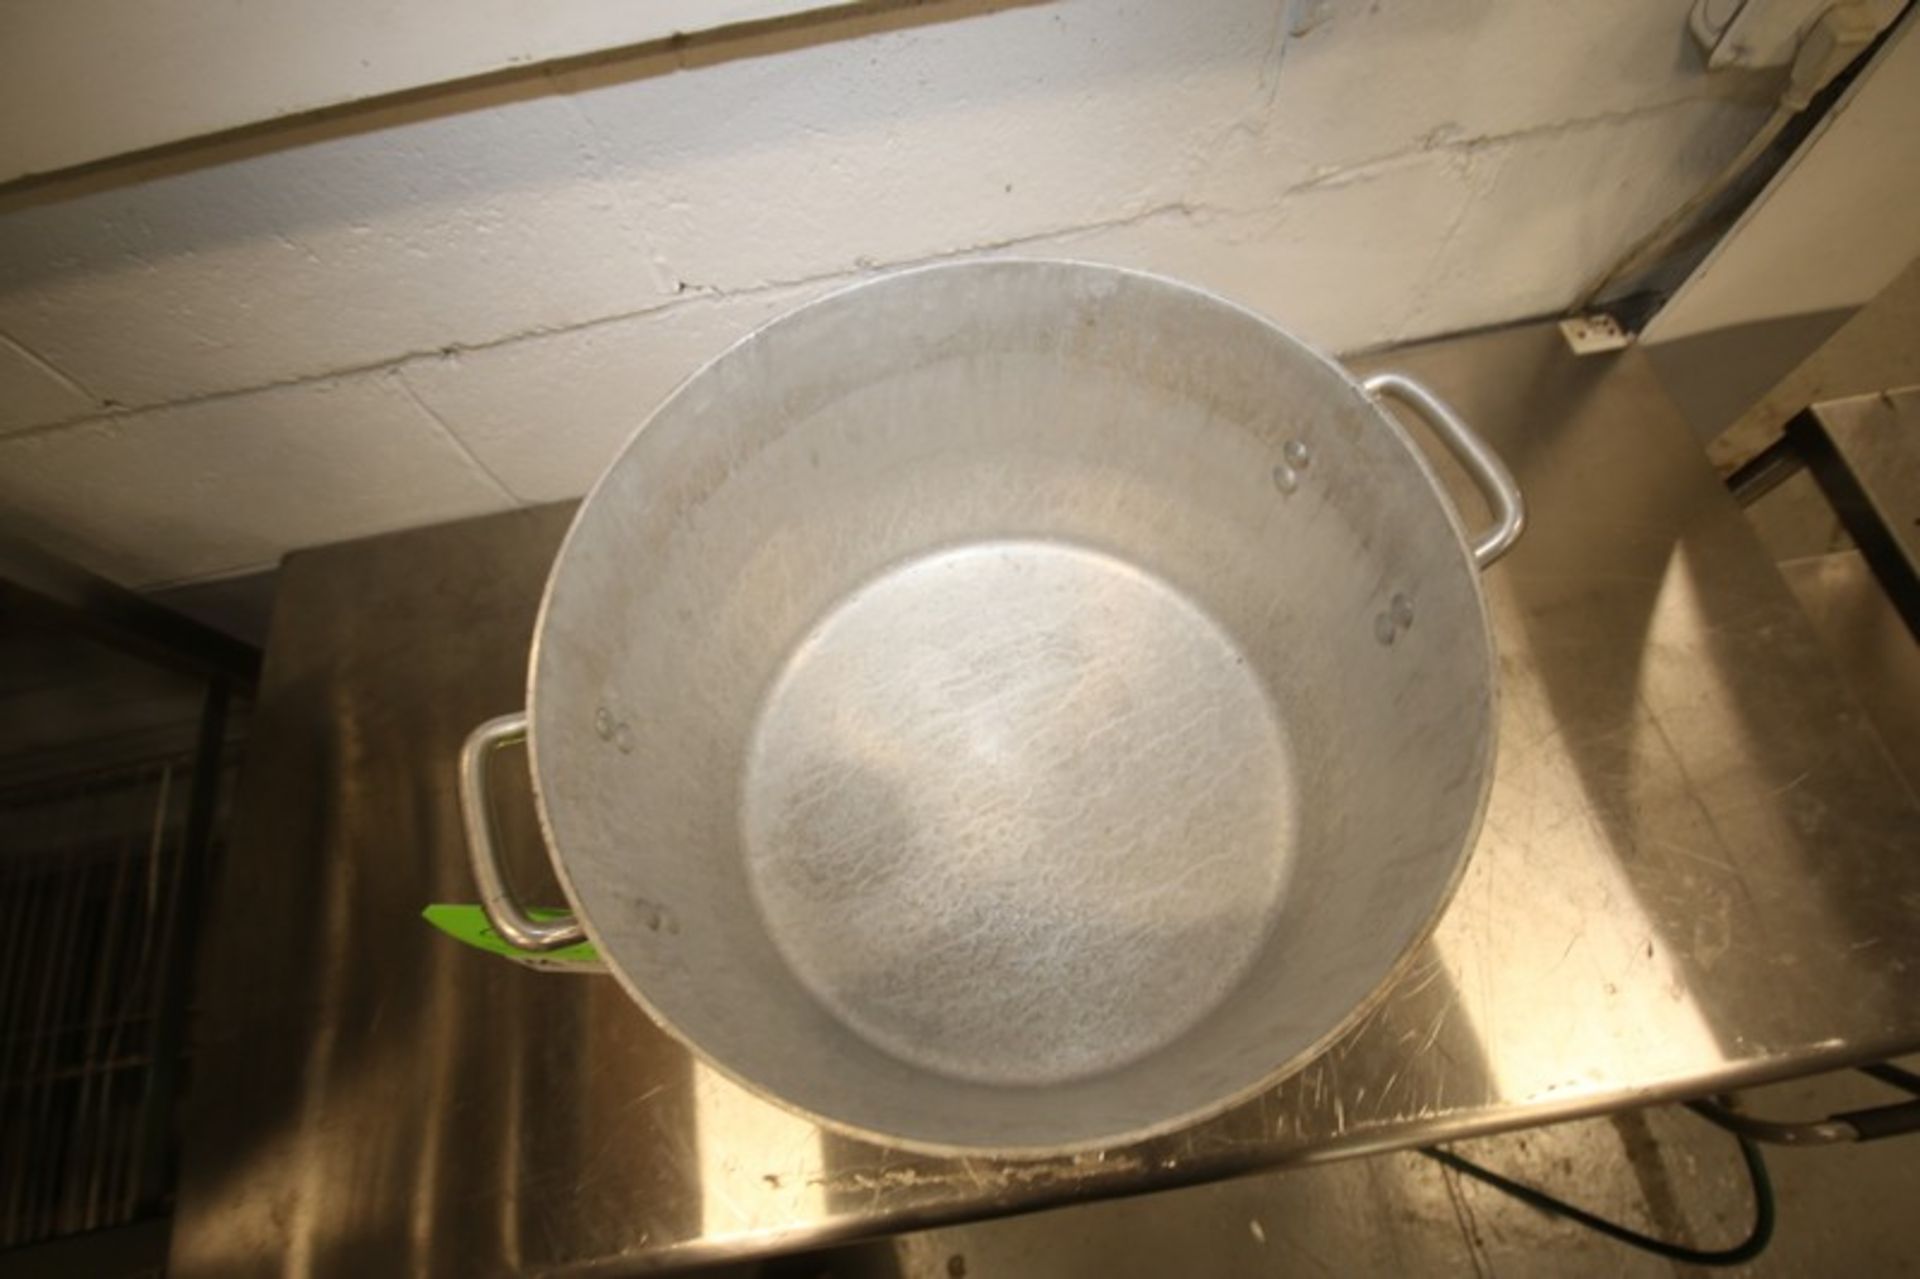 Winware 16" W x 11" D Alum Sauce Pot (INV#101820) (Located @ the MDG Auction Showroom in Pgh., - Image 2 of 2